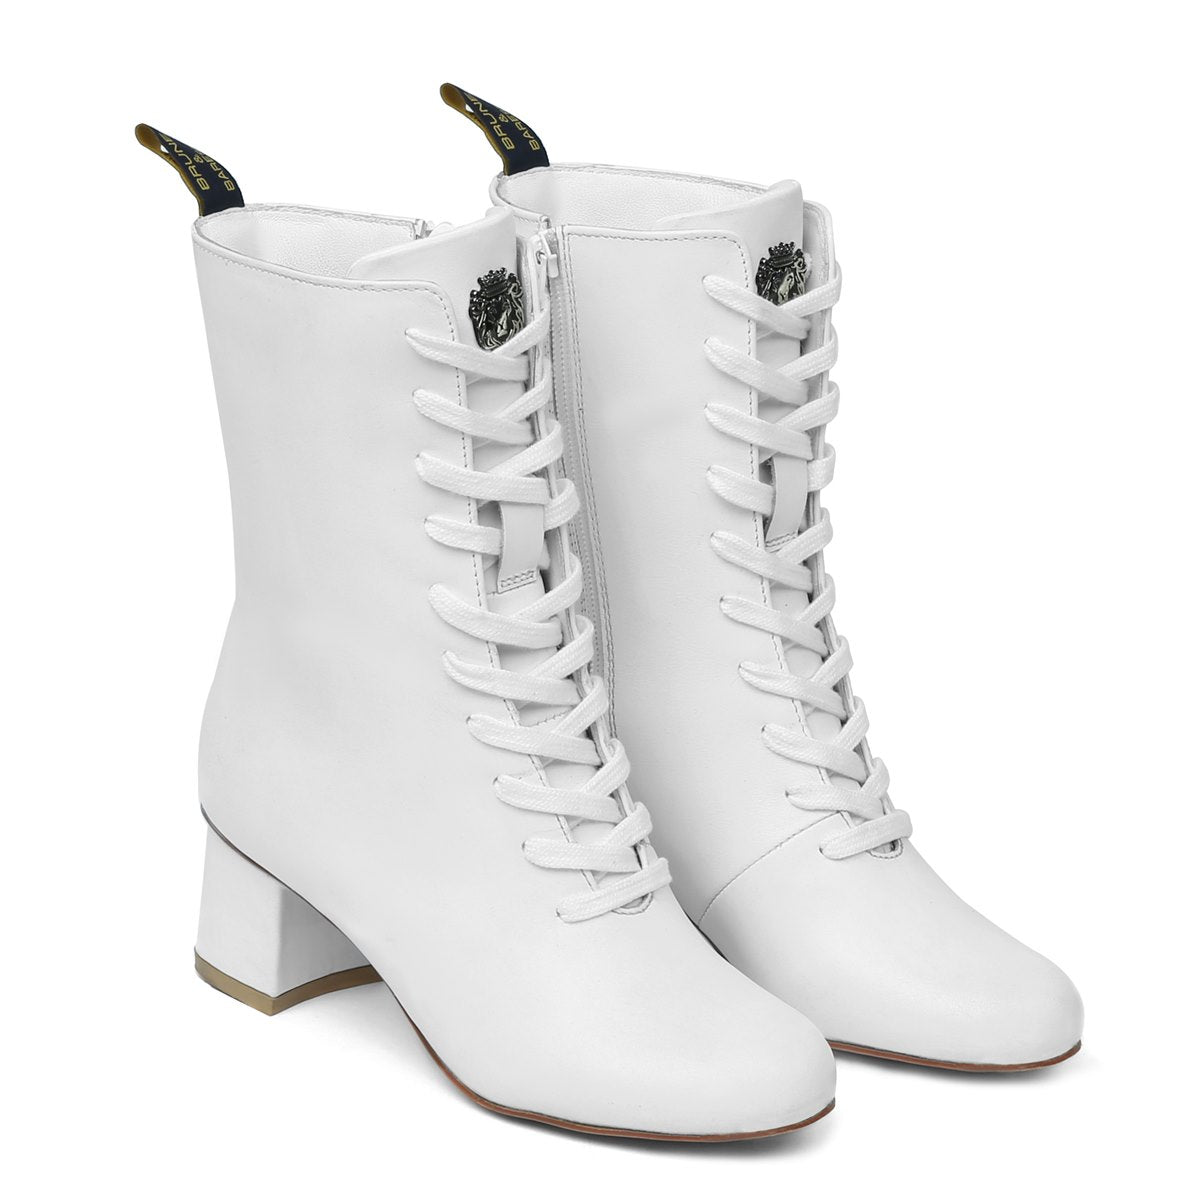 Lace Up Ankle Boots Block Heel - Cream – Zalinah White